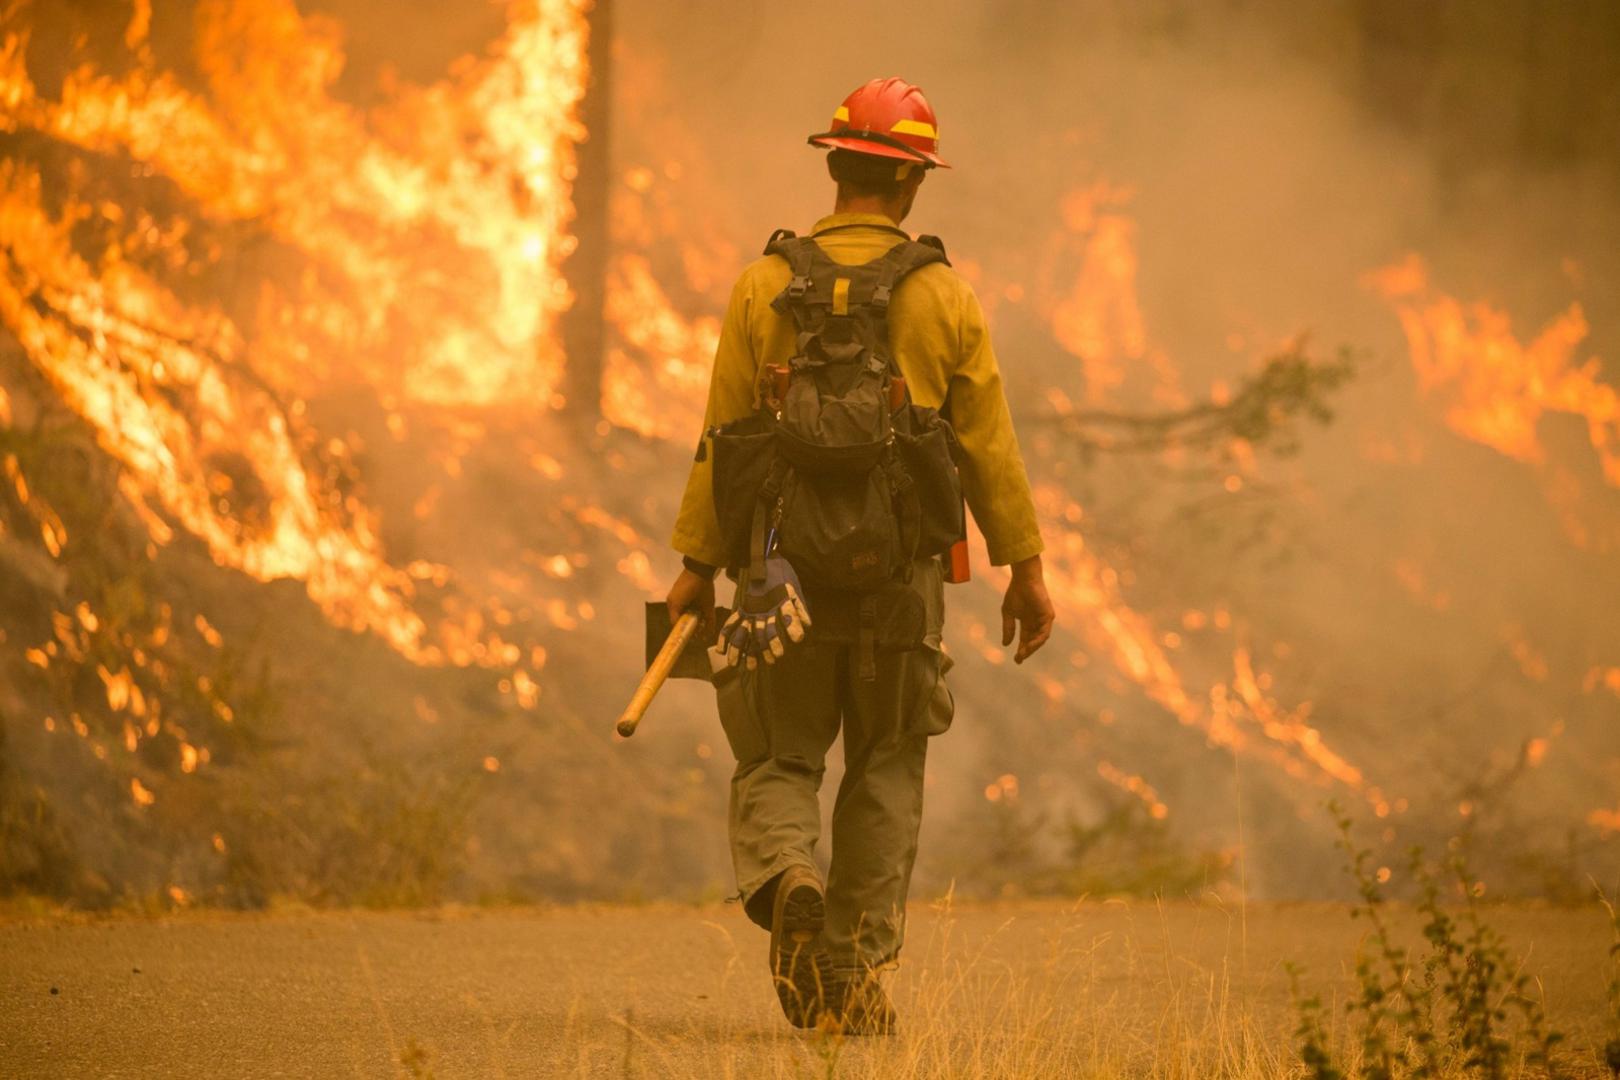 According to the U.S. Forest Service - Pacific Northwest Region, as of September 11, 2020, 35 large fires were burning 1,503,001 acres across Oregon and Washington. The Forest Service has dispatched 7,055 Fire Personnel, 183 Crews, 557 Engines, and 50 Helicopters to confront the volume of fires throughout the Northwest. Photo by U.S. Forest Service - Pacific Northwest Region/UPI Photo via Newscom Newscom/PIXSELL